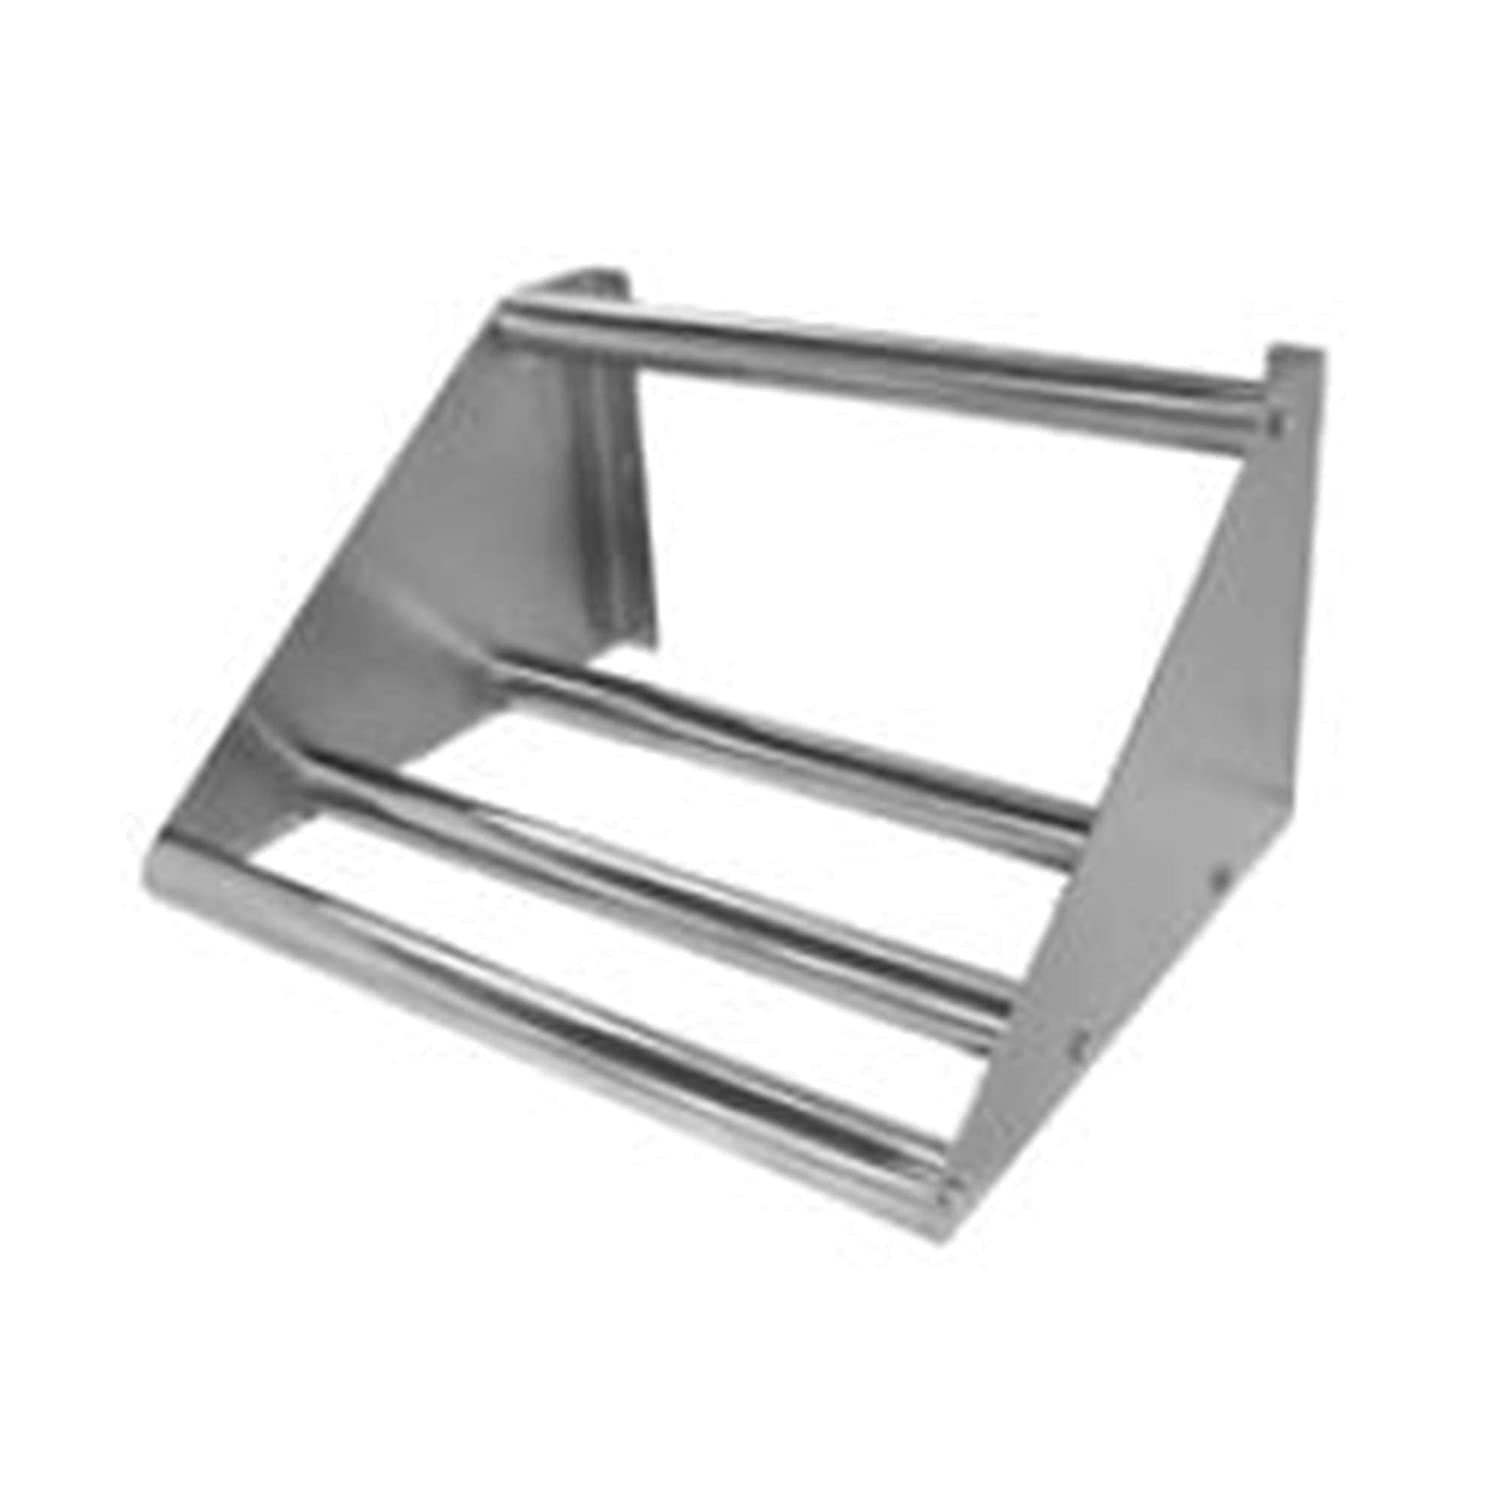 GSW Stainless Steel Tubular Dish Table Sorting Shelf for Washing and Storage, 22”W x 18”D x 11-1/4”H (22"W)